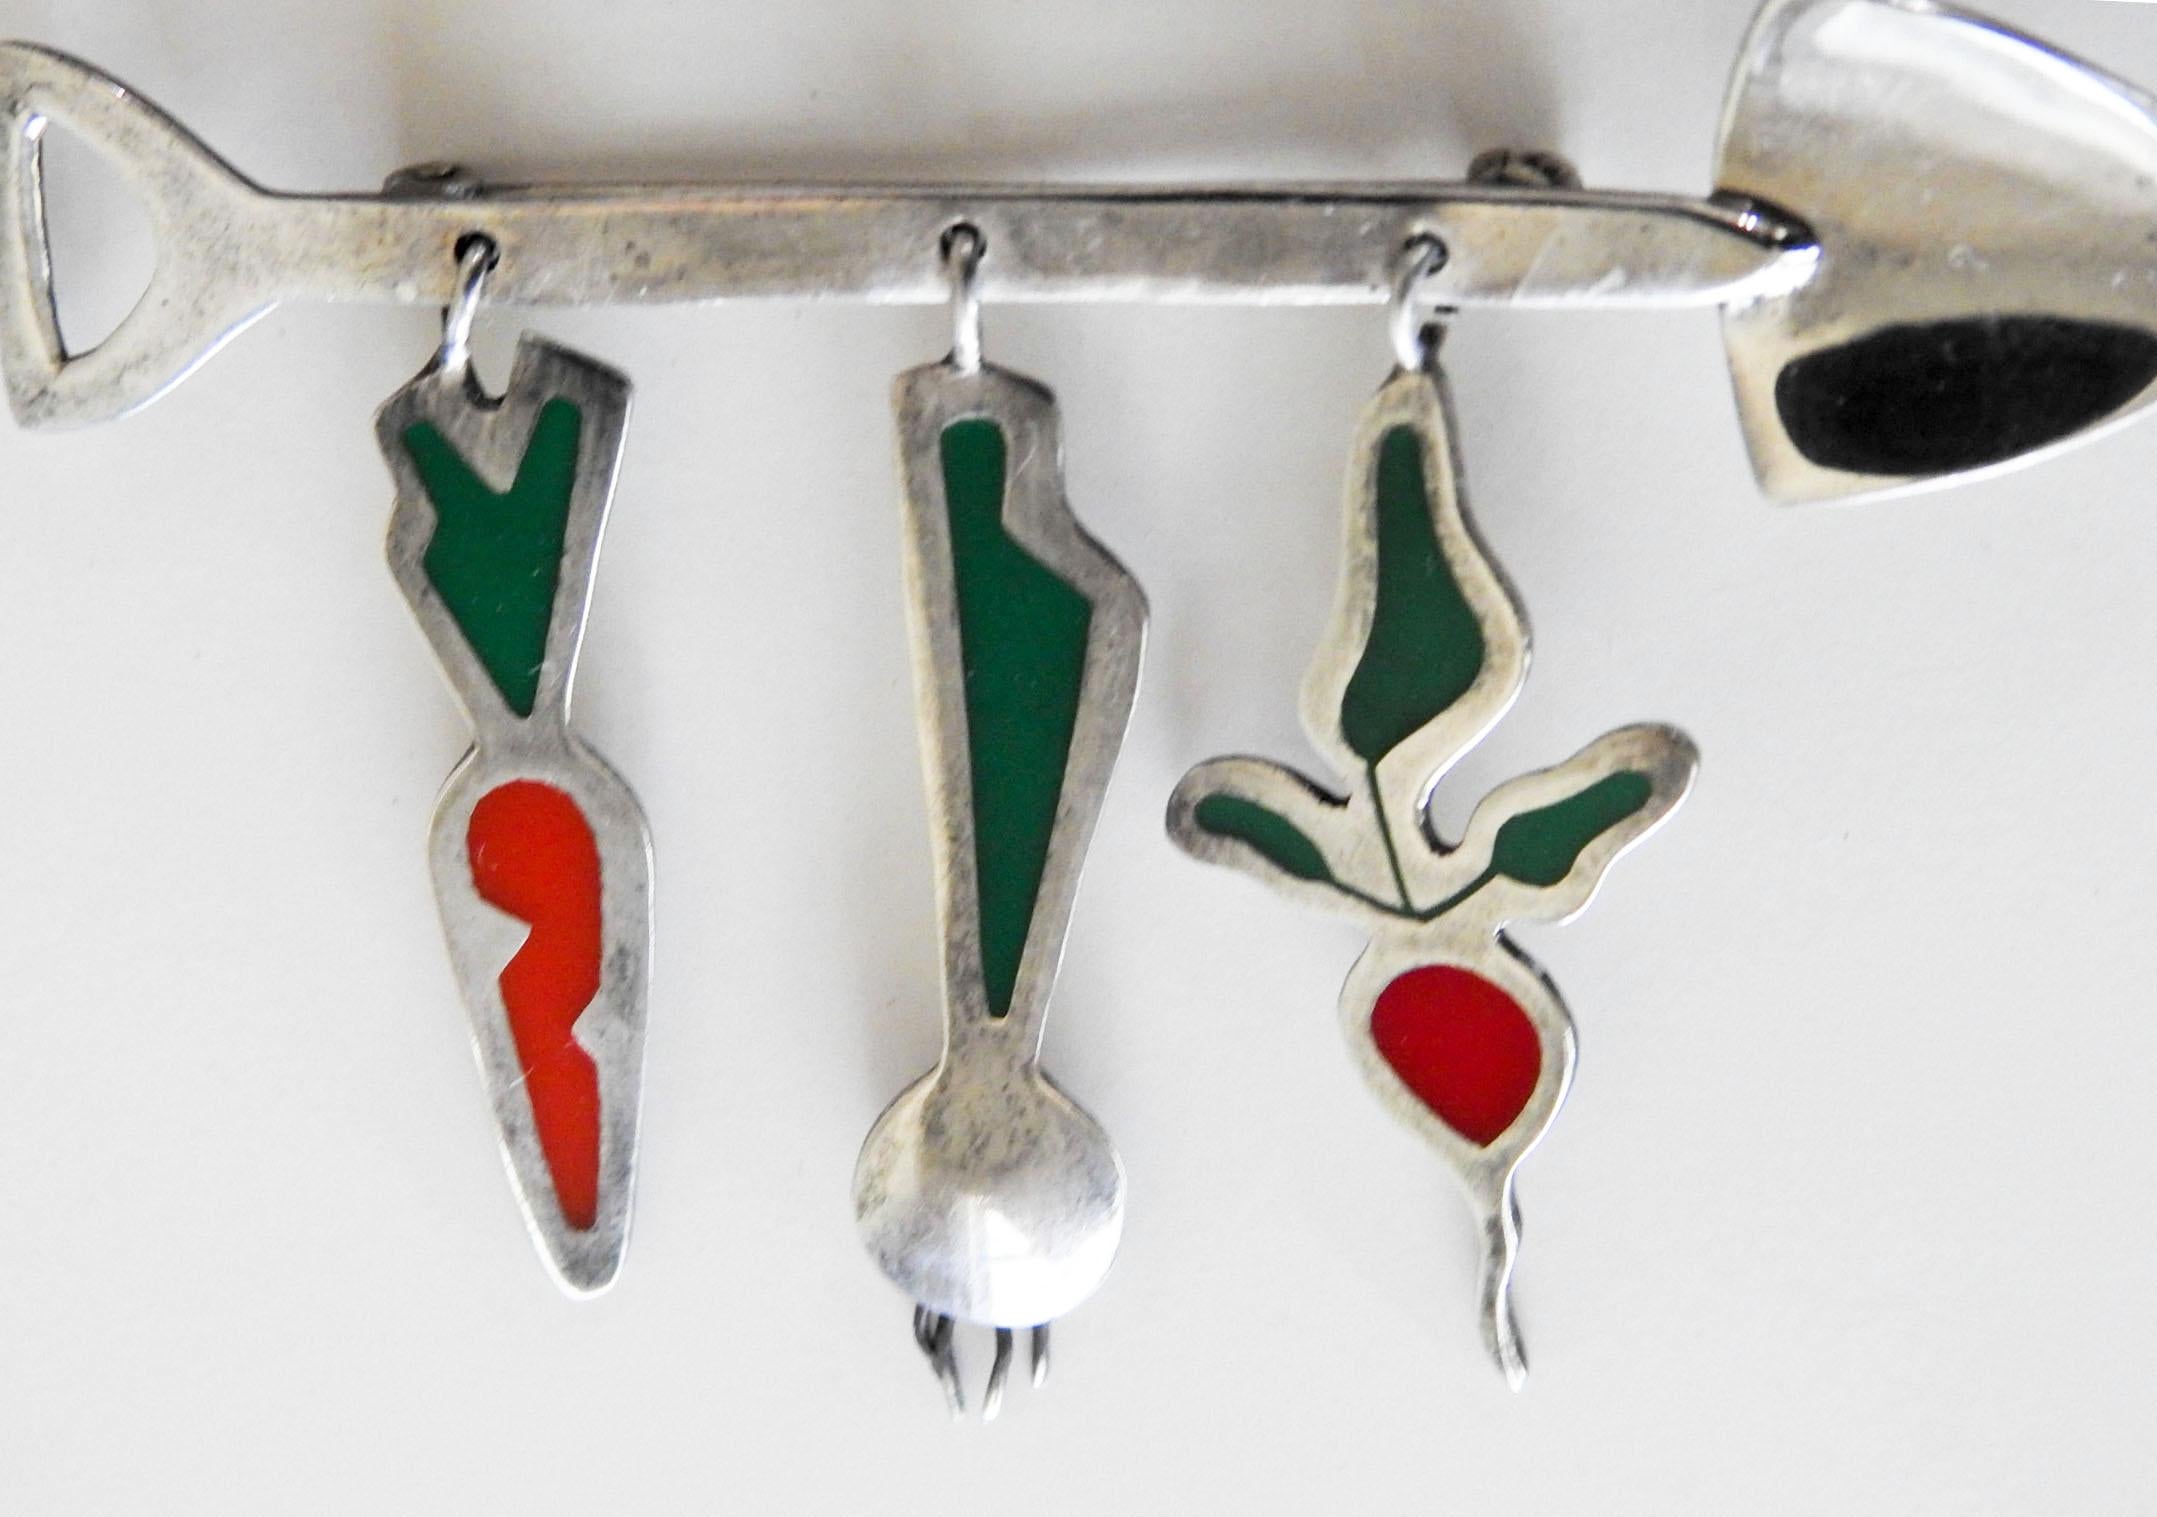 Vintage late 20th century artistic dimensional sterling silver and enamel brooch. Marked Mexico 925 OAHD on back, shovel with enameled carrot, onion and radish . Onion is 1.5